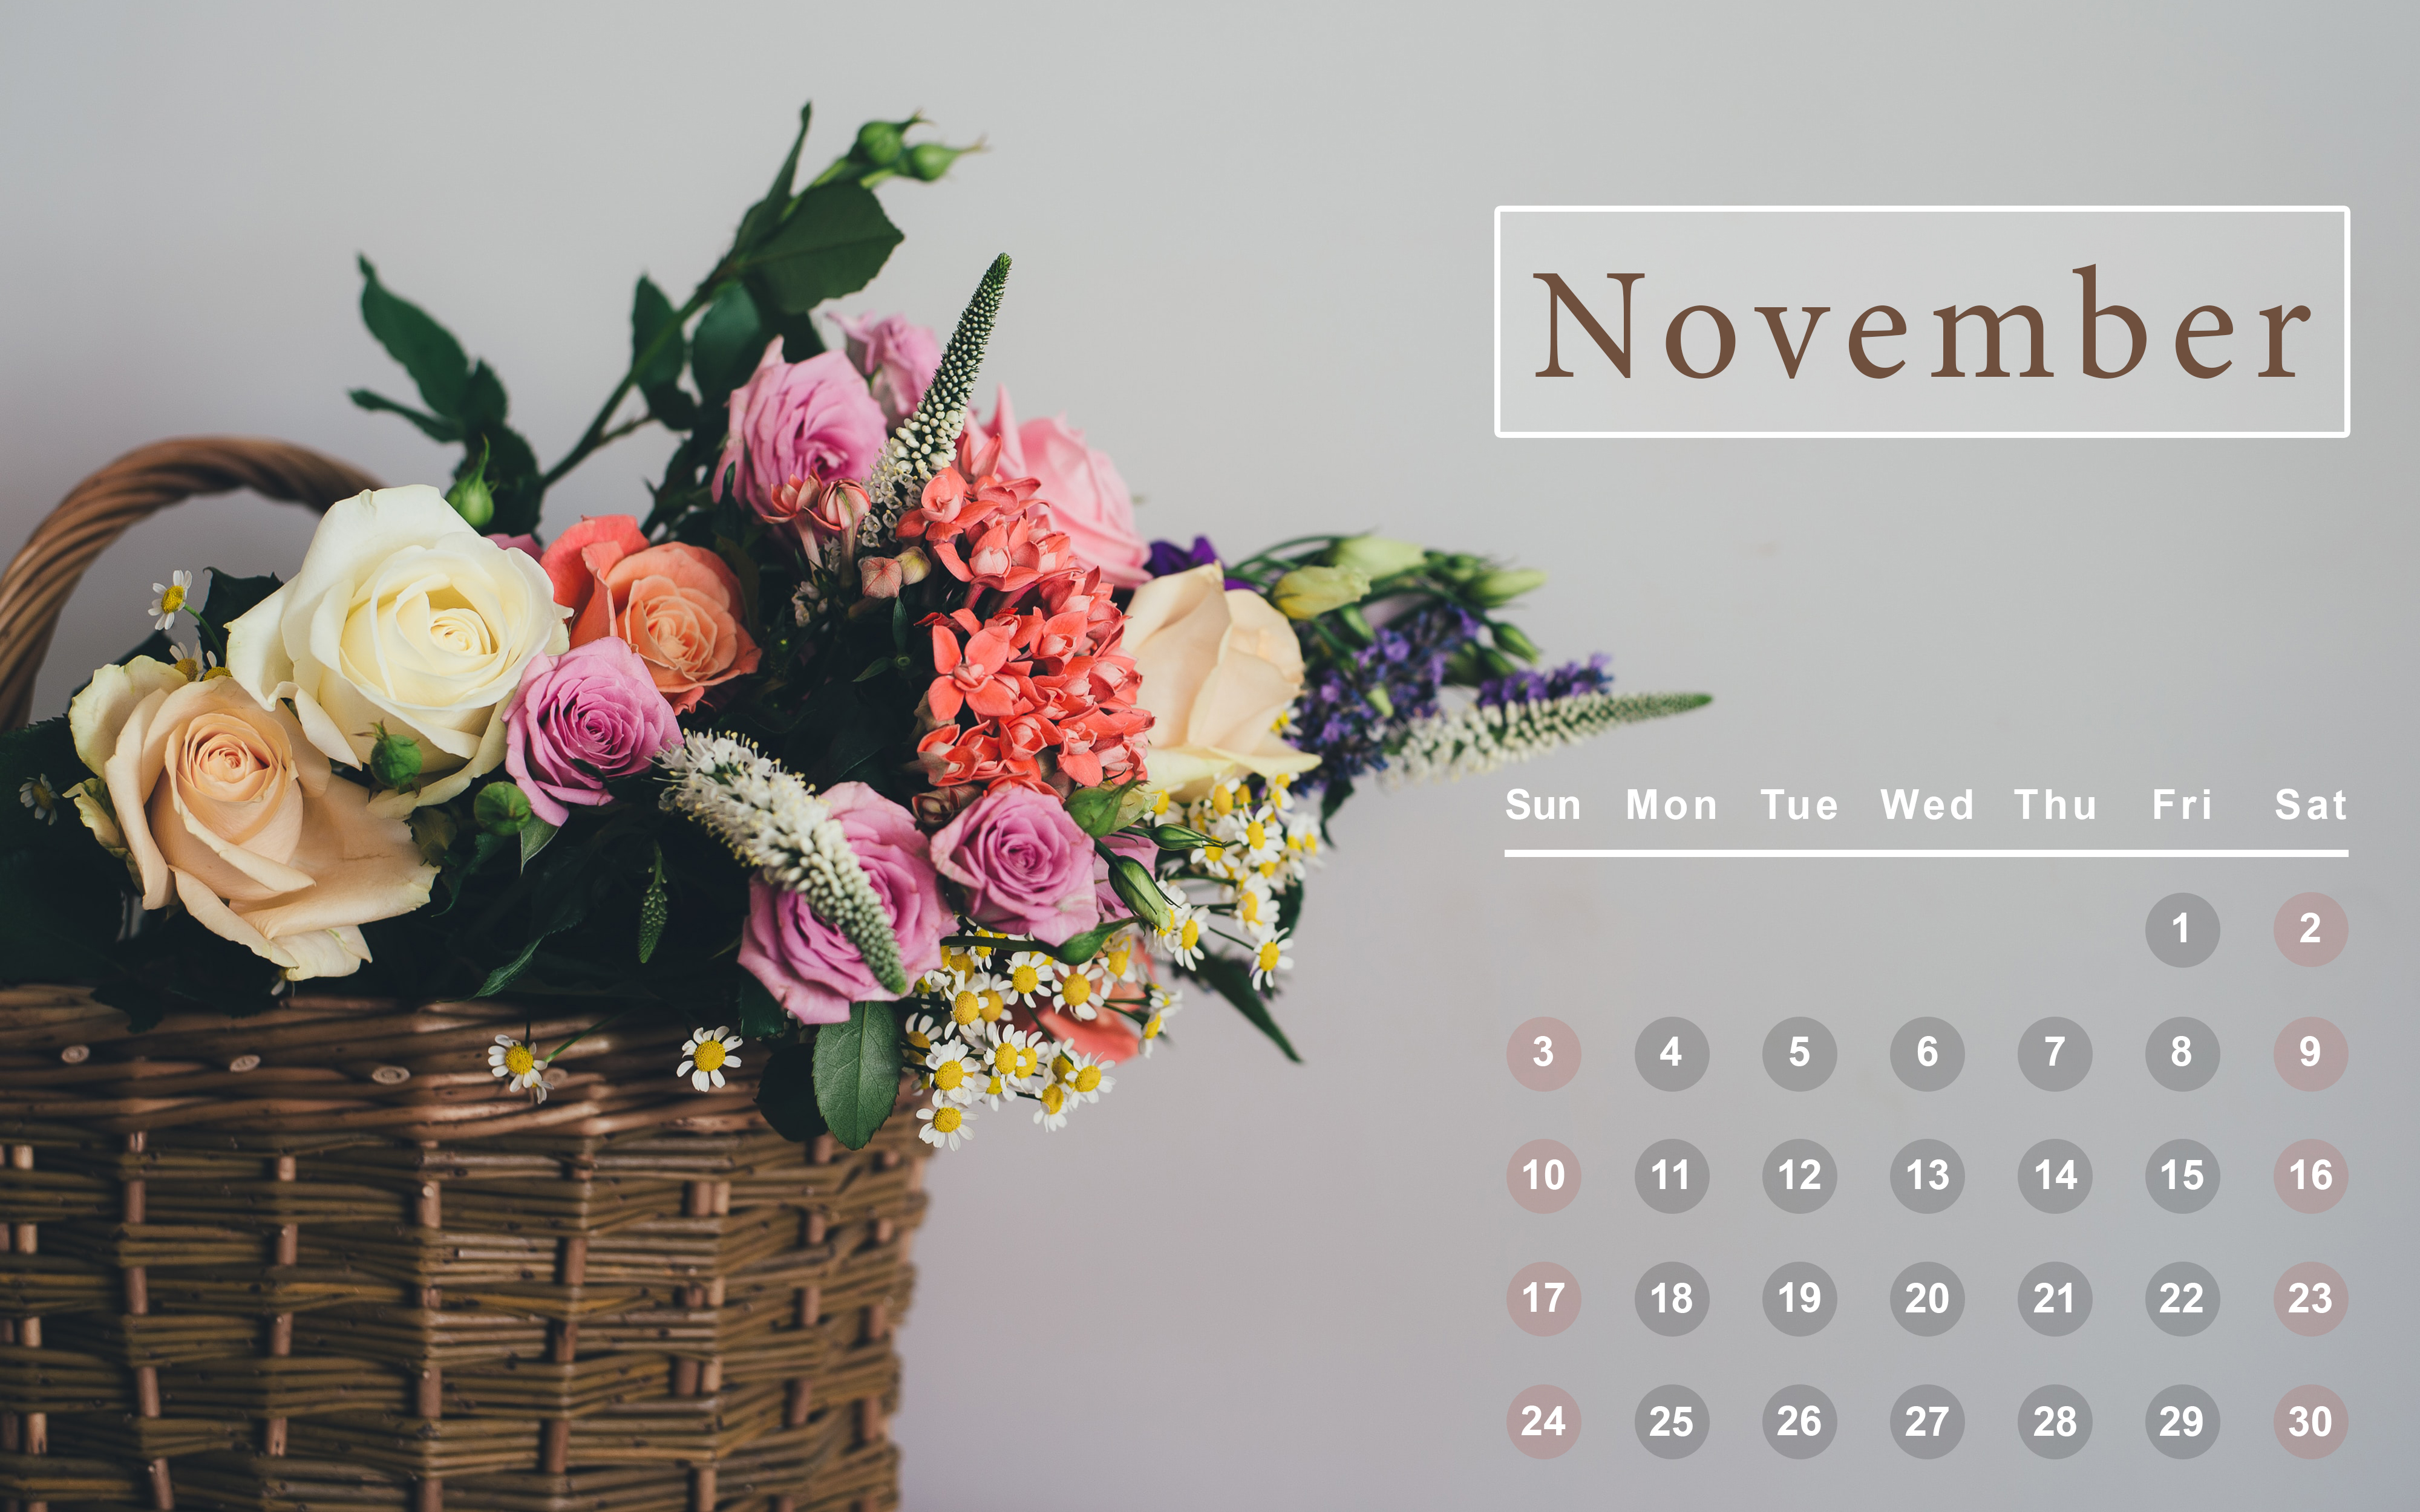 Floral November 2019 Wallpaper - Good Morning Have A Beautiful Day Flowers - HD Wallpaper 